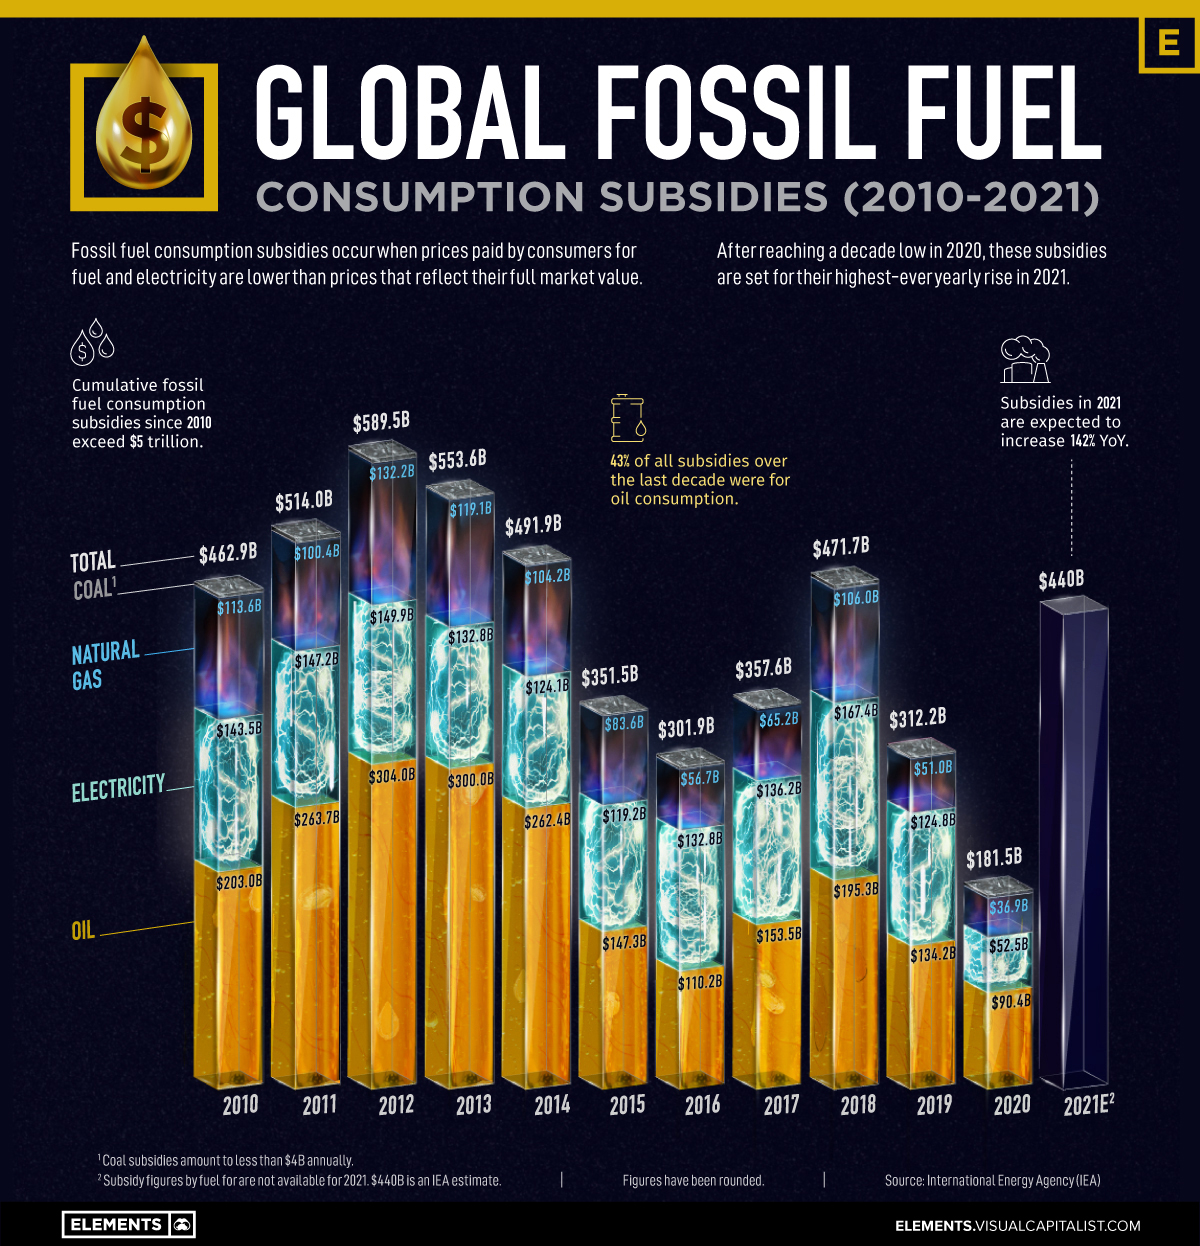 Charted: $5 Trillion in Fossil Fuel Subsidies (2010-2021)